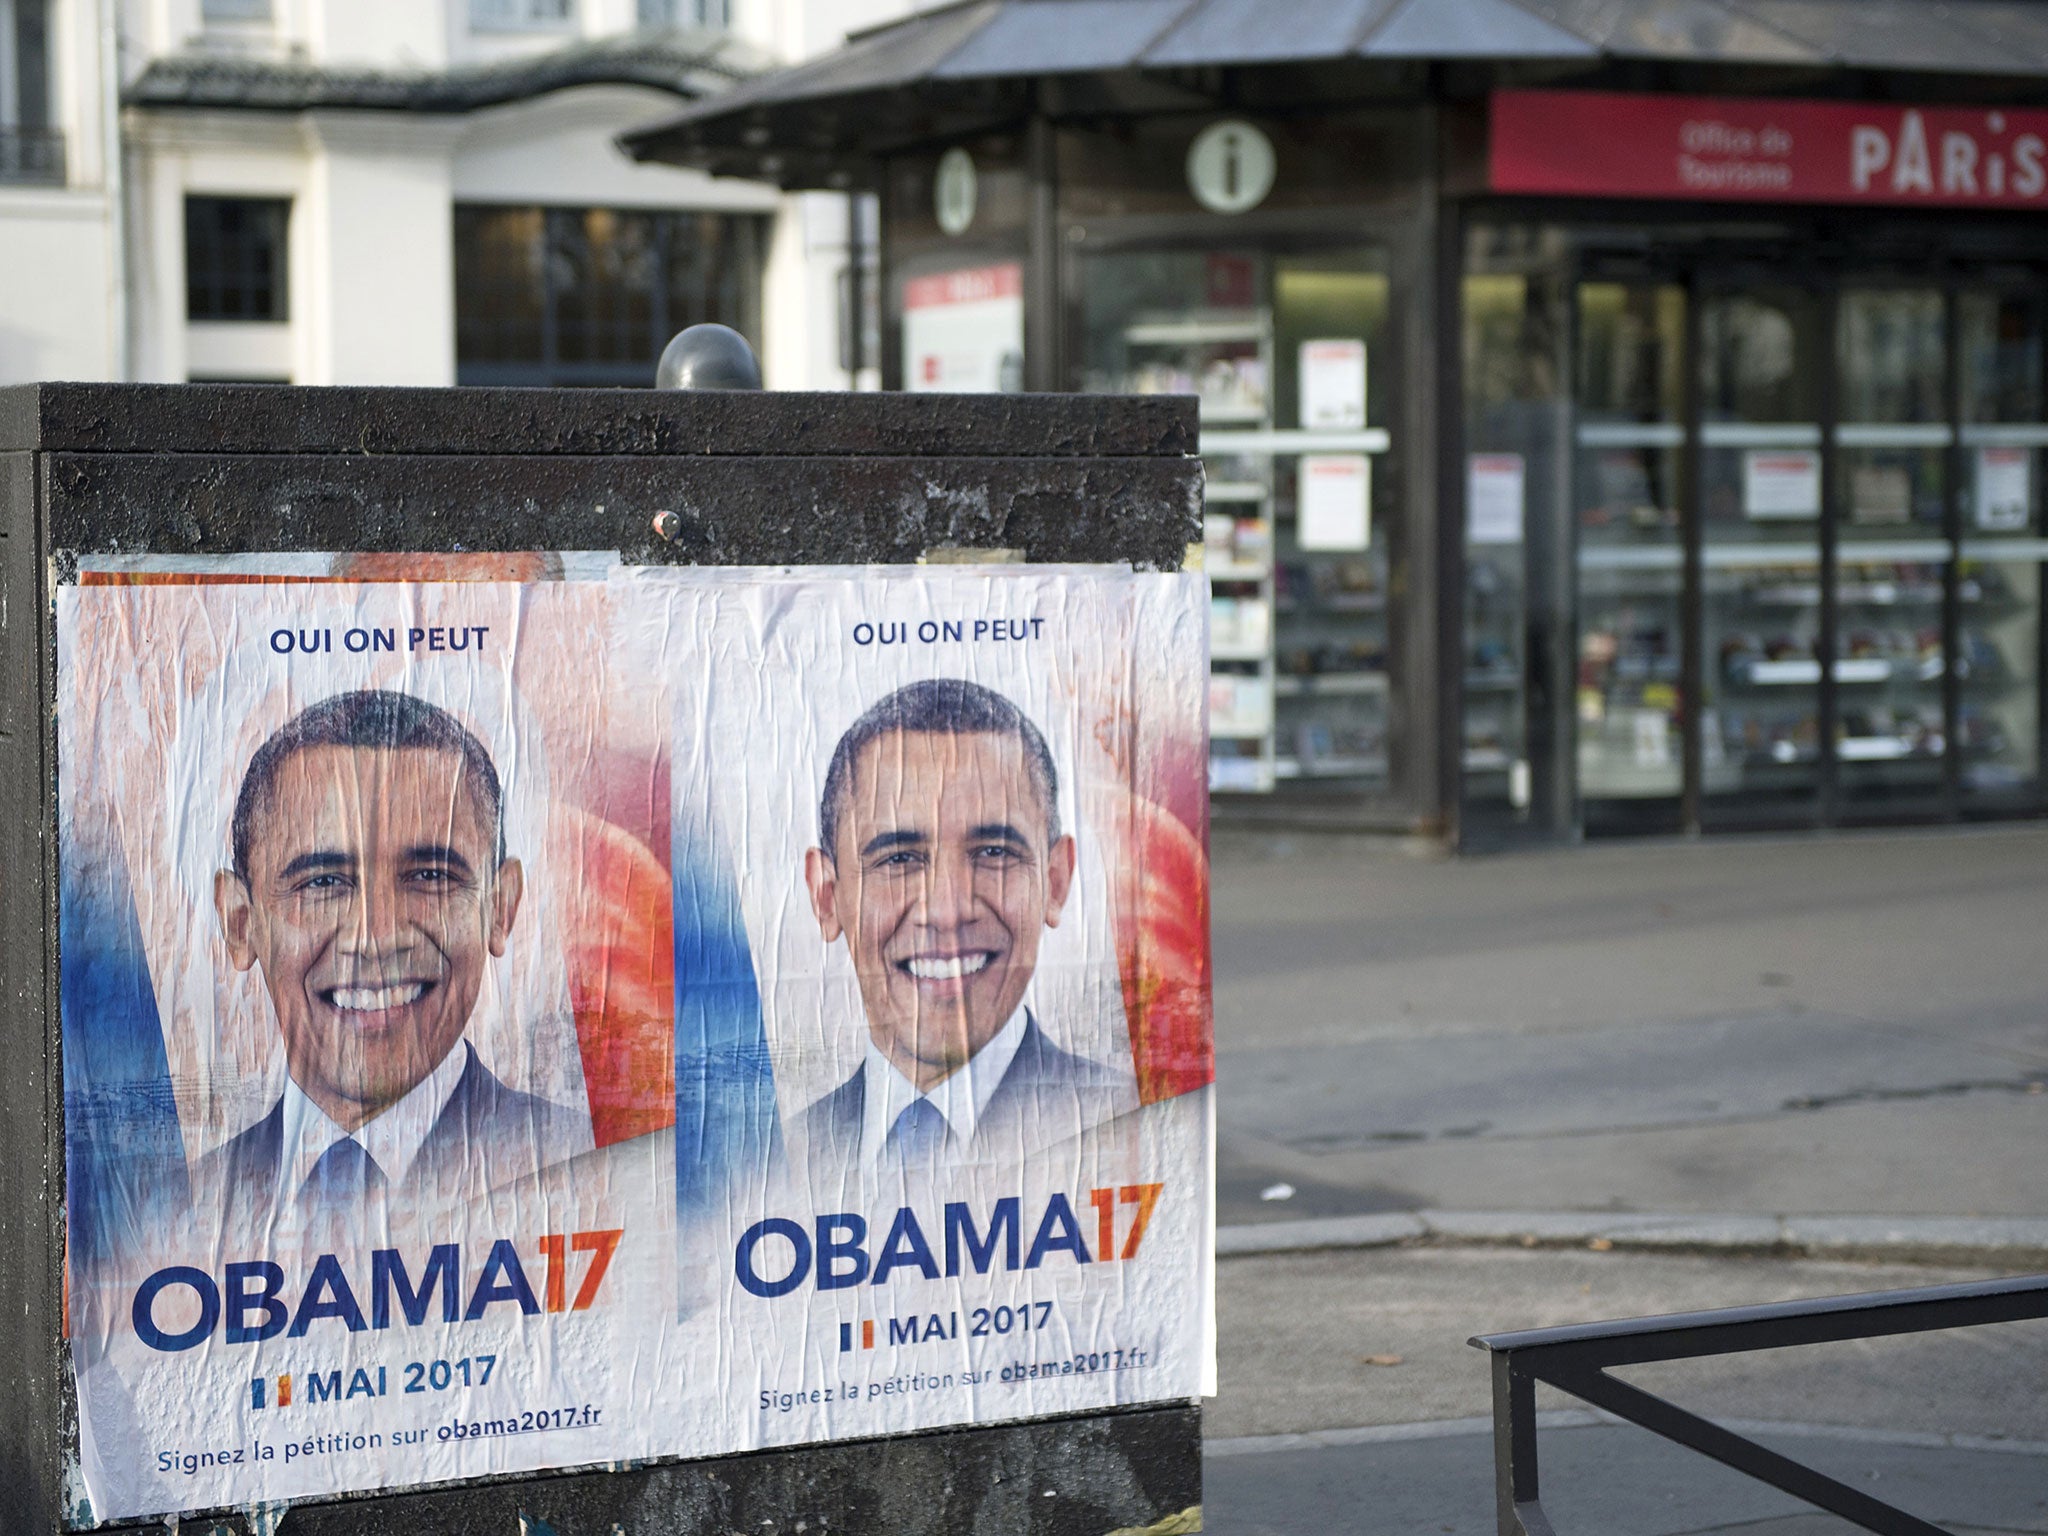 Obama 17 posters are seen displayed in Paris ahead of the Franch presidential election